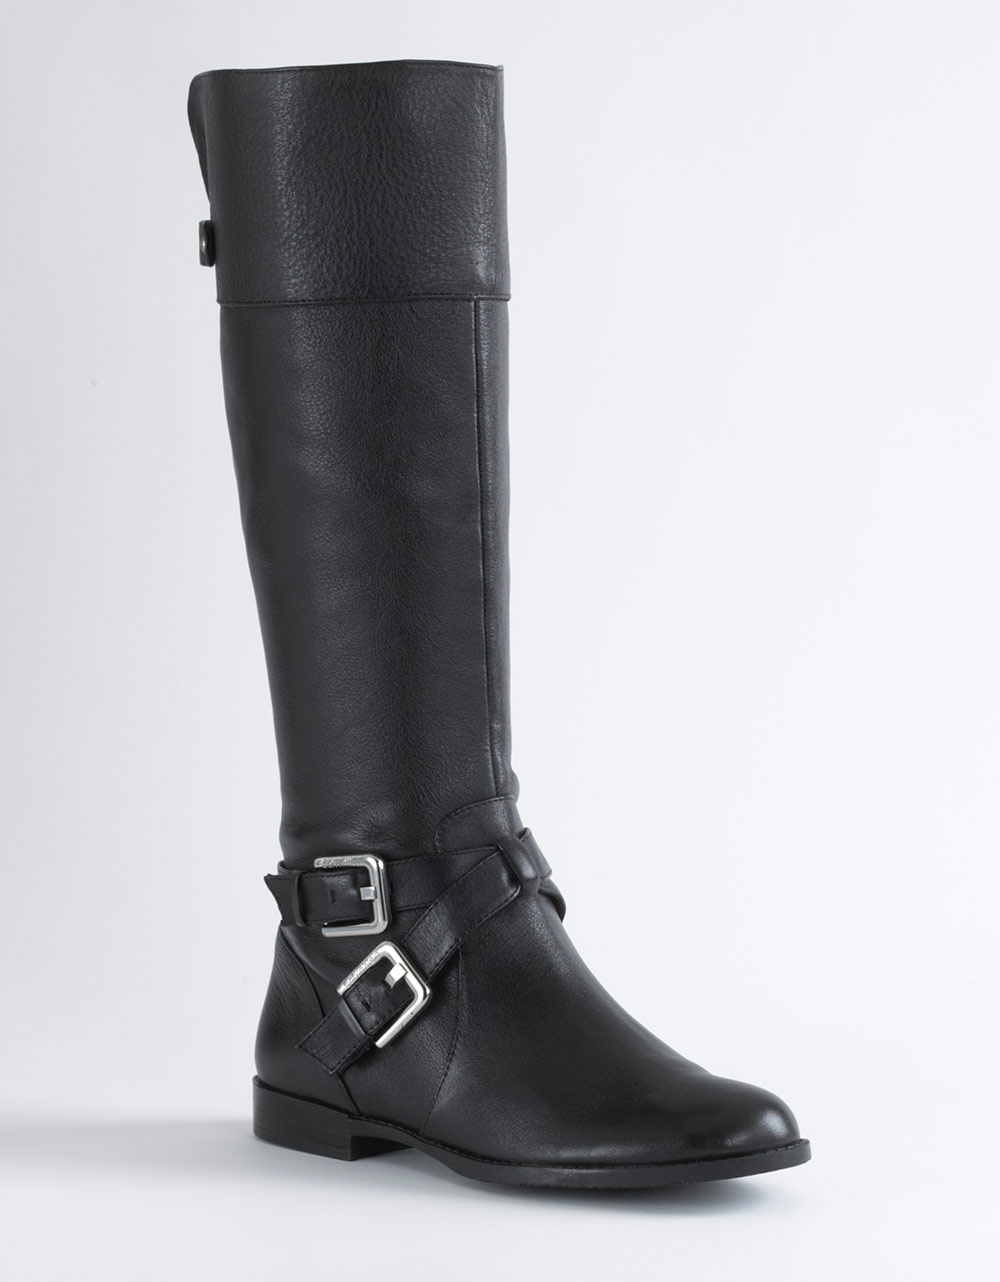 Calvin Klein Hayden Double Buckle Tall Boots in Black (black leather ...